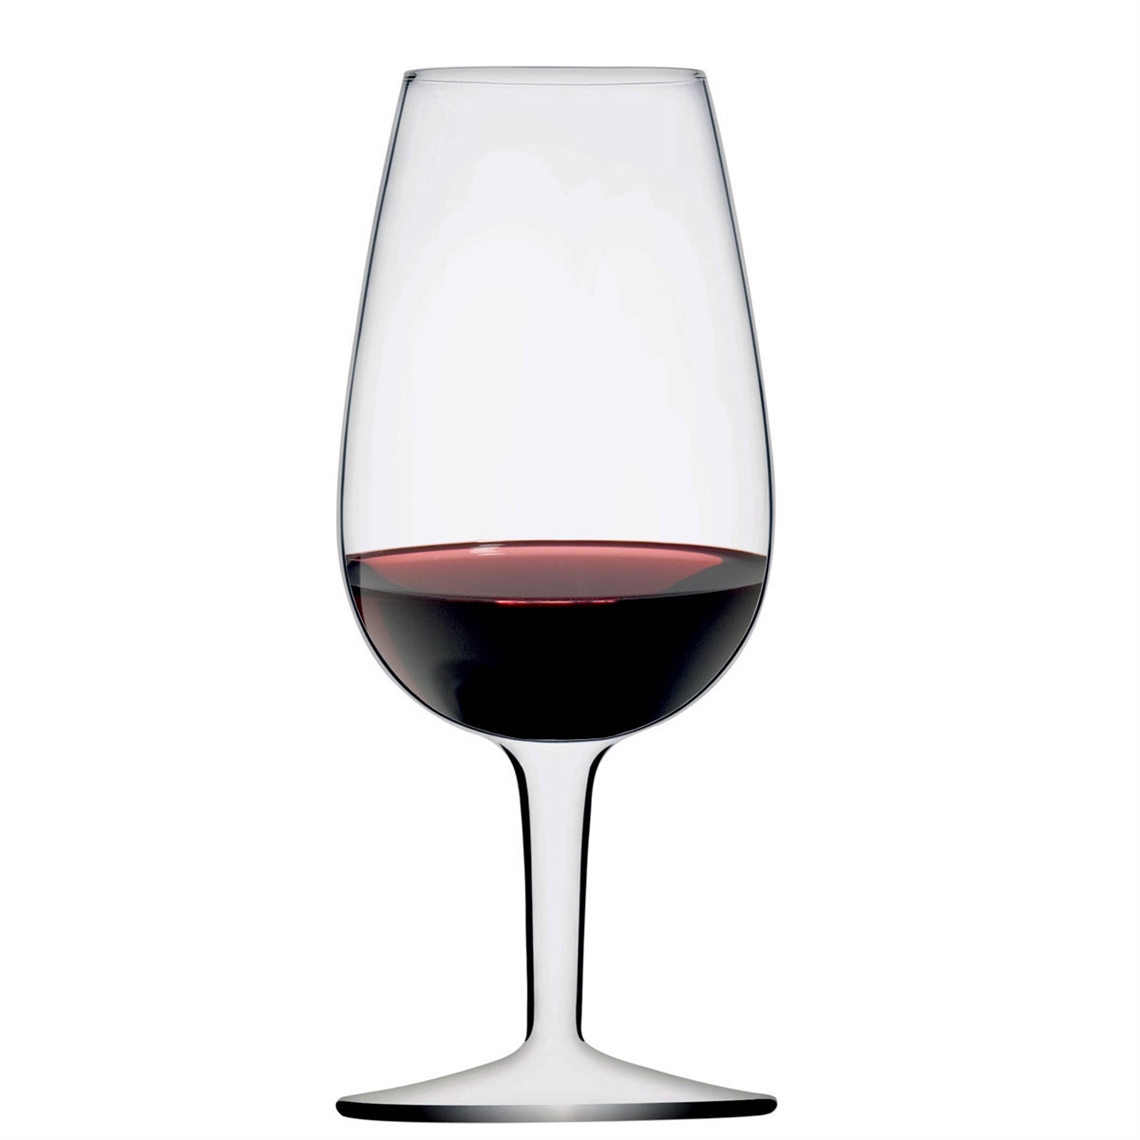 View more white wine glasses from our Wine Tasting Glasses range